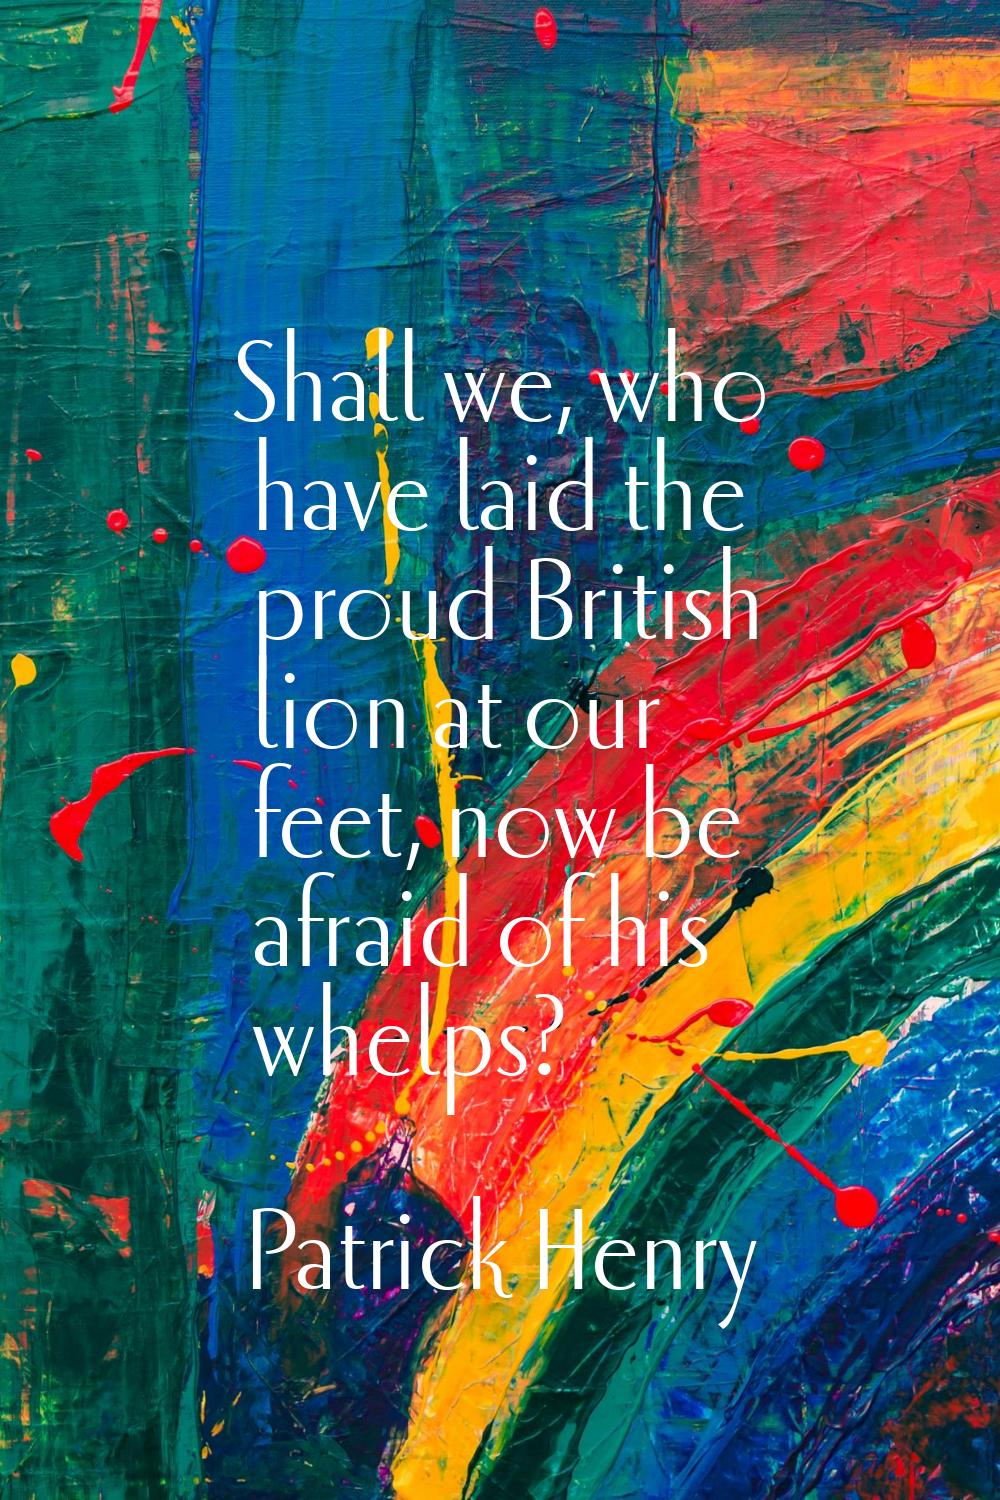 Shall we, who have laid the proud British lion at our feet, now be afraid of his whelps?